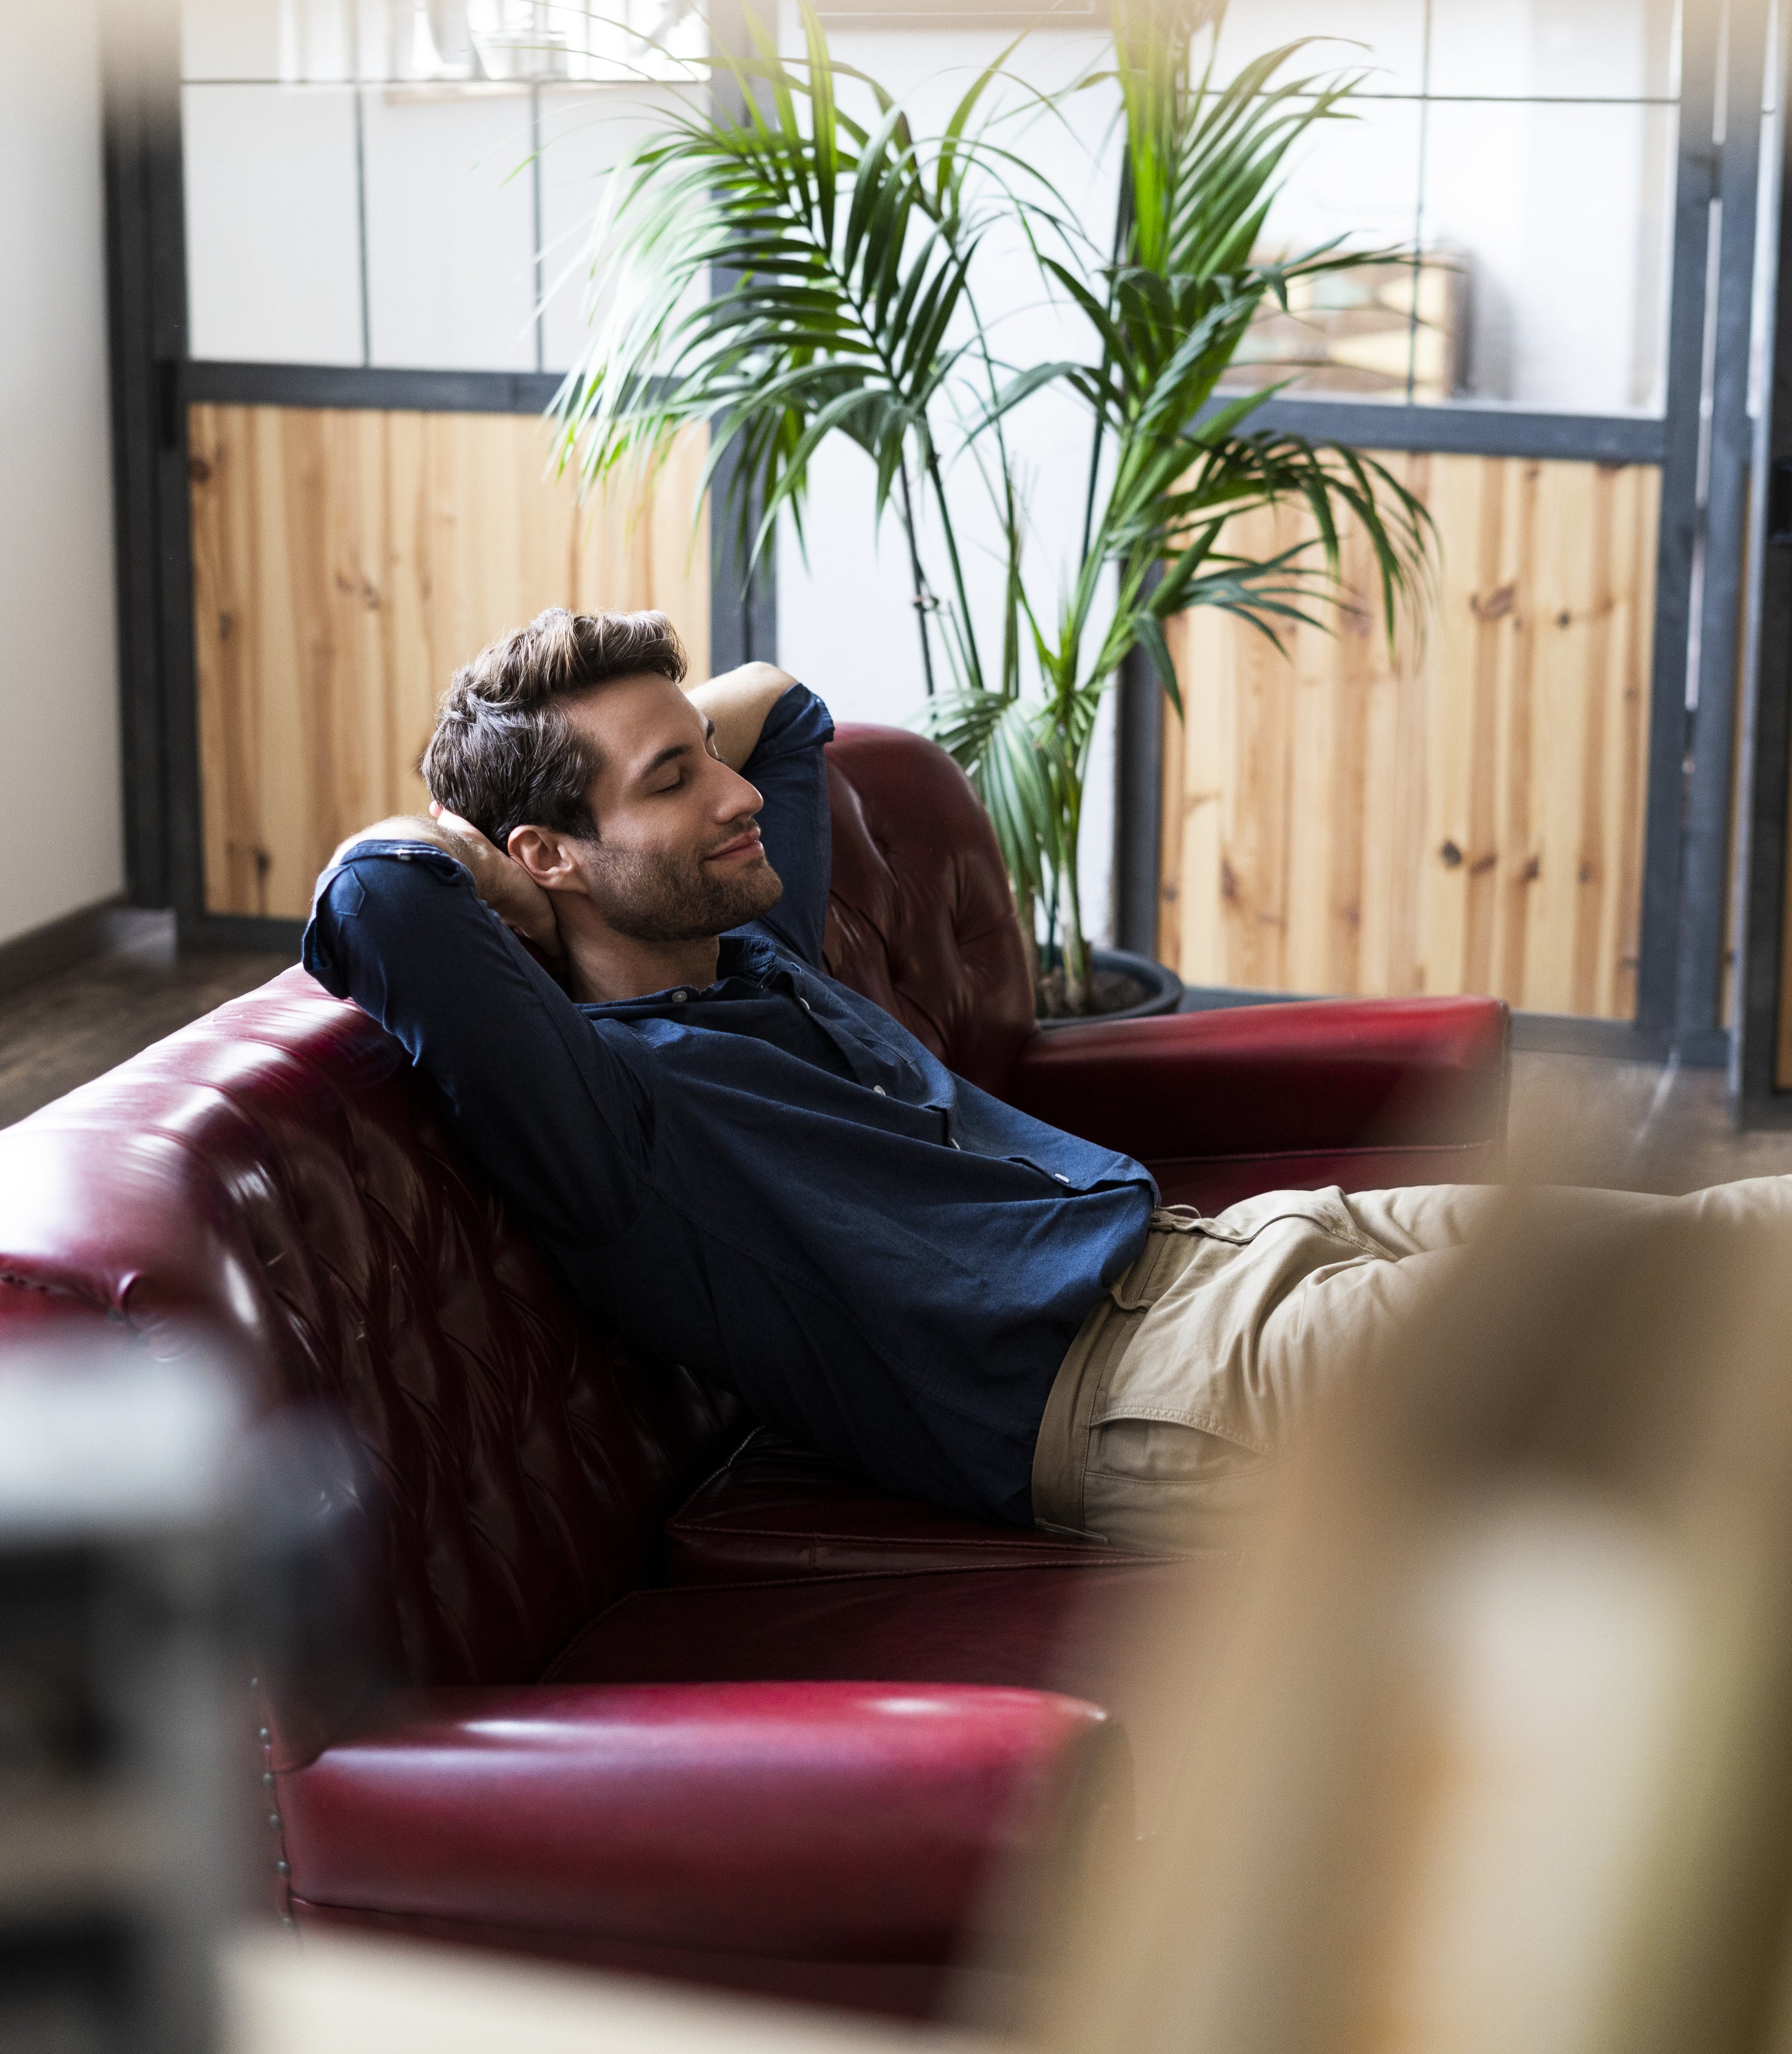 A guy on a couch with legs propped up and eyes closed, plants and office doors around him